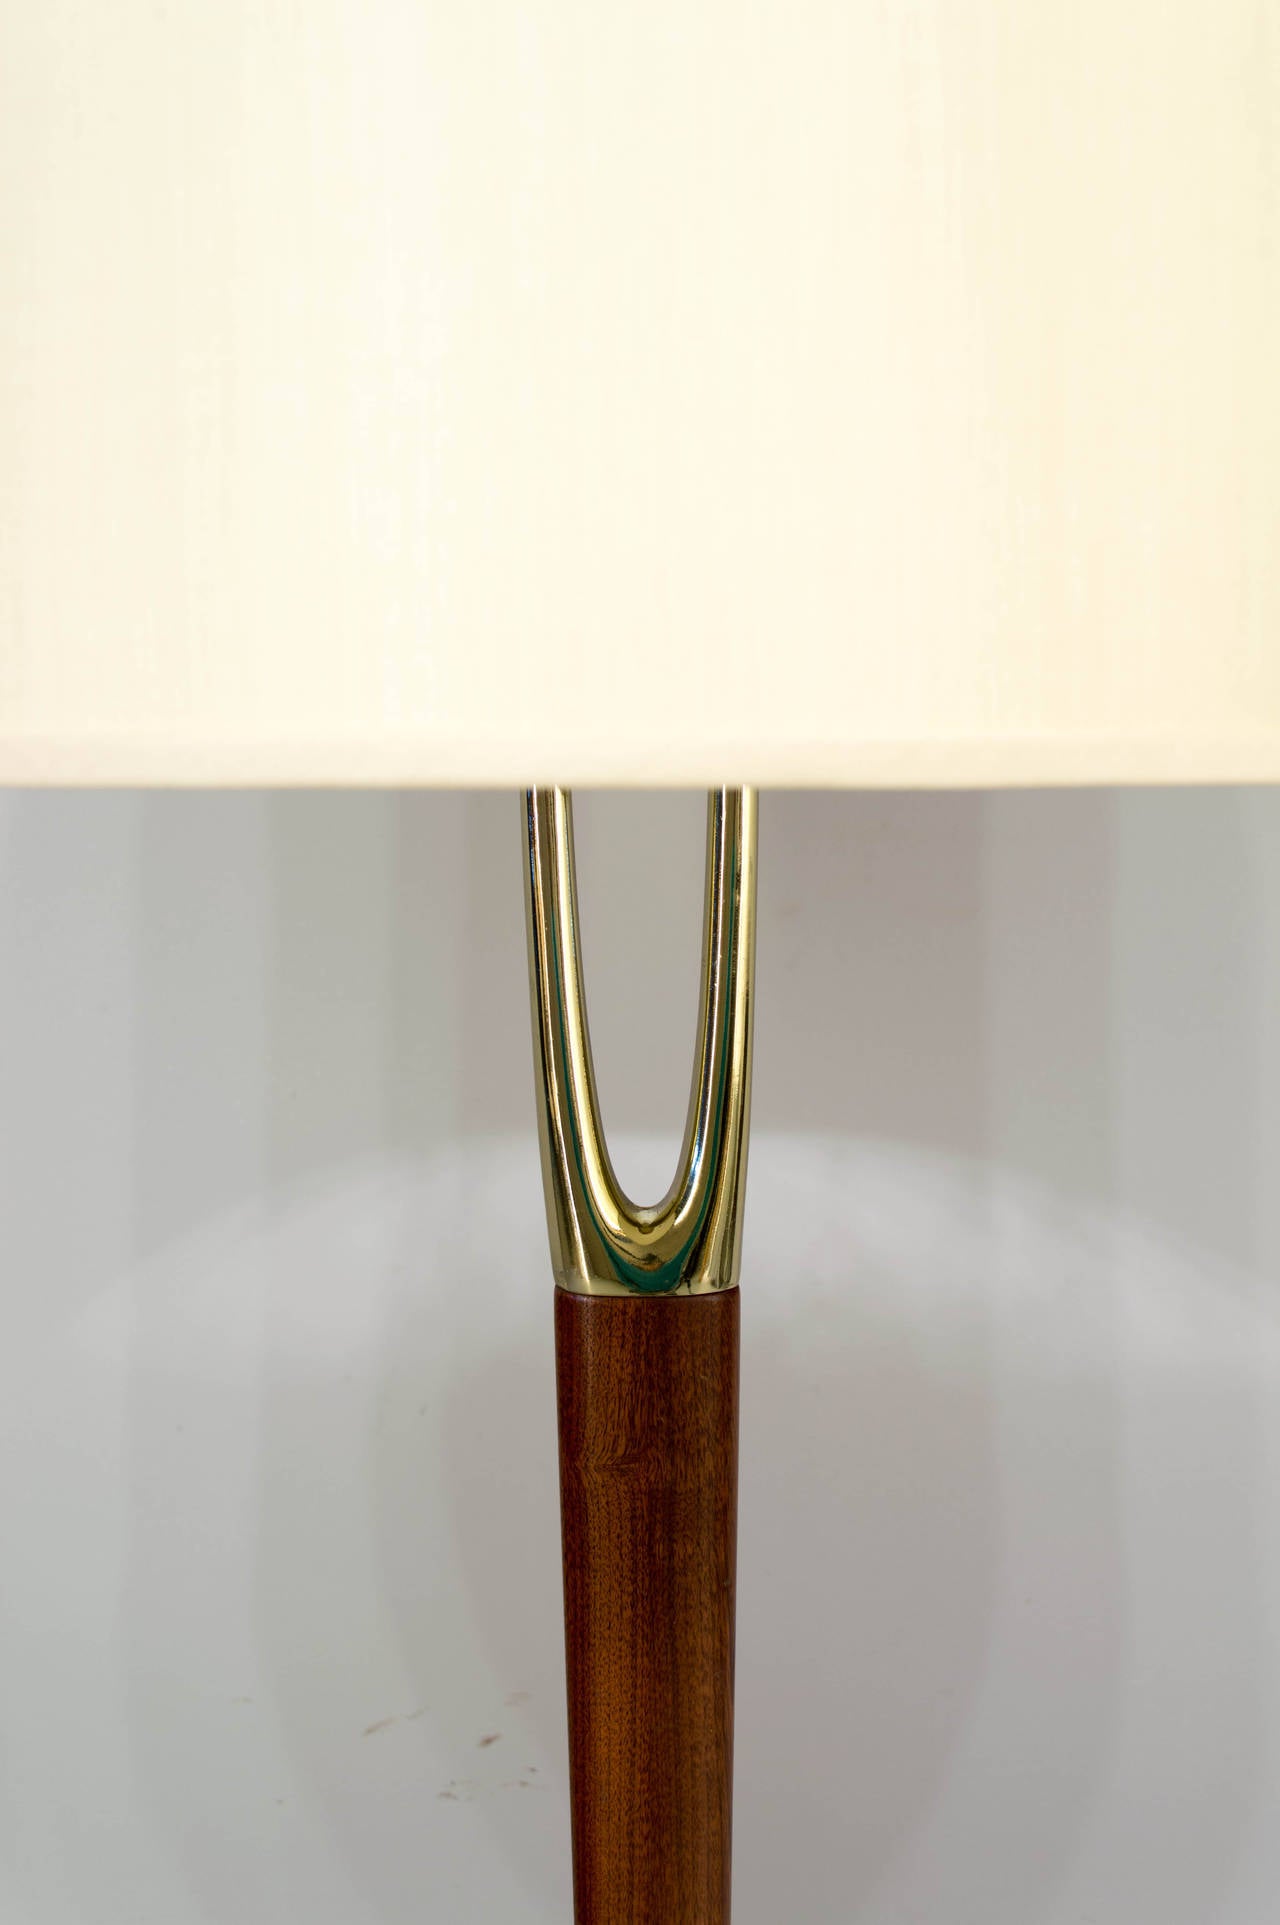 Iconic, sought after Mid Century Modern floor lamp made by the Laurel Lamp Company. Solid teak wood center post with beautiful wood grain. Brass plated wishbone shaped prong at top and a brass plated base. Rewired.
48